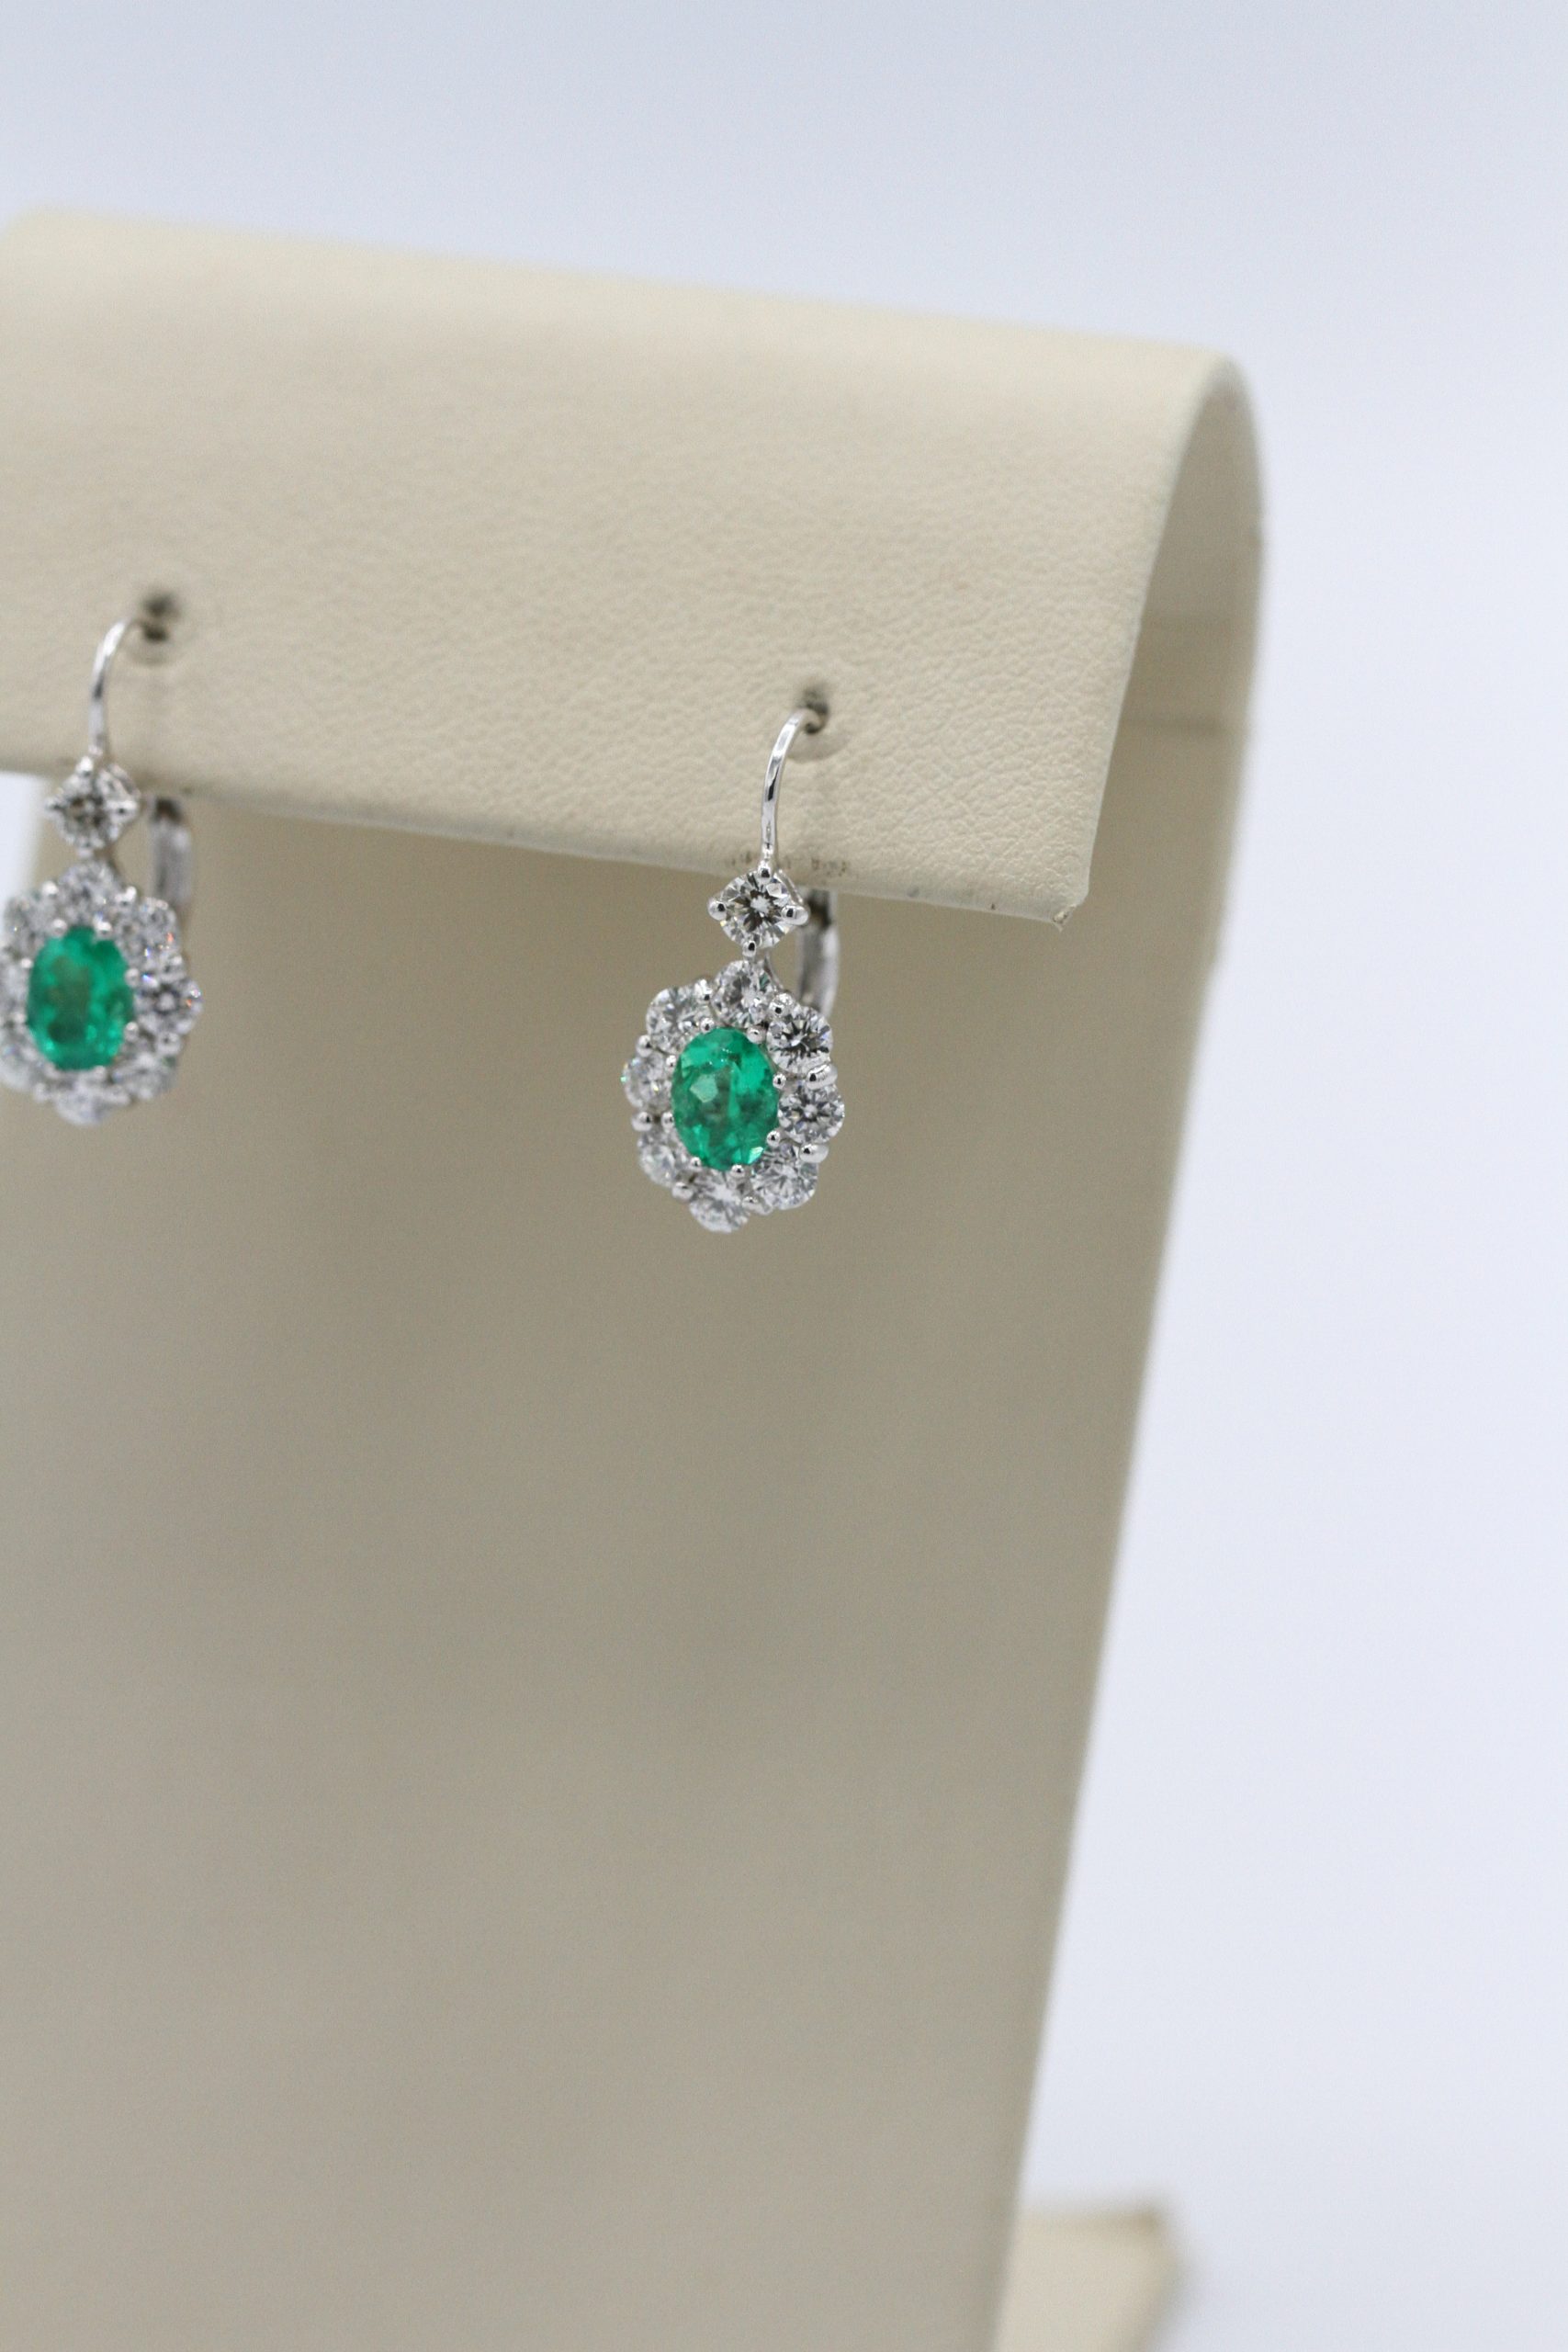 silver earrings with emerald centerpieces.